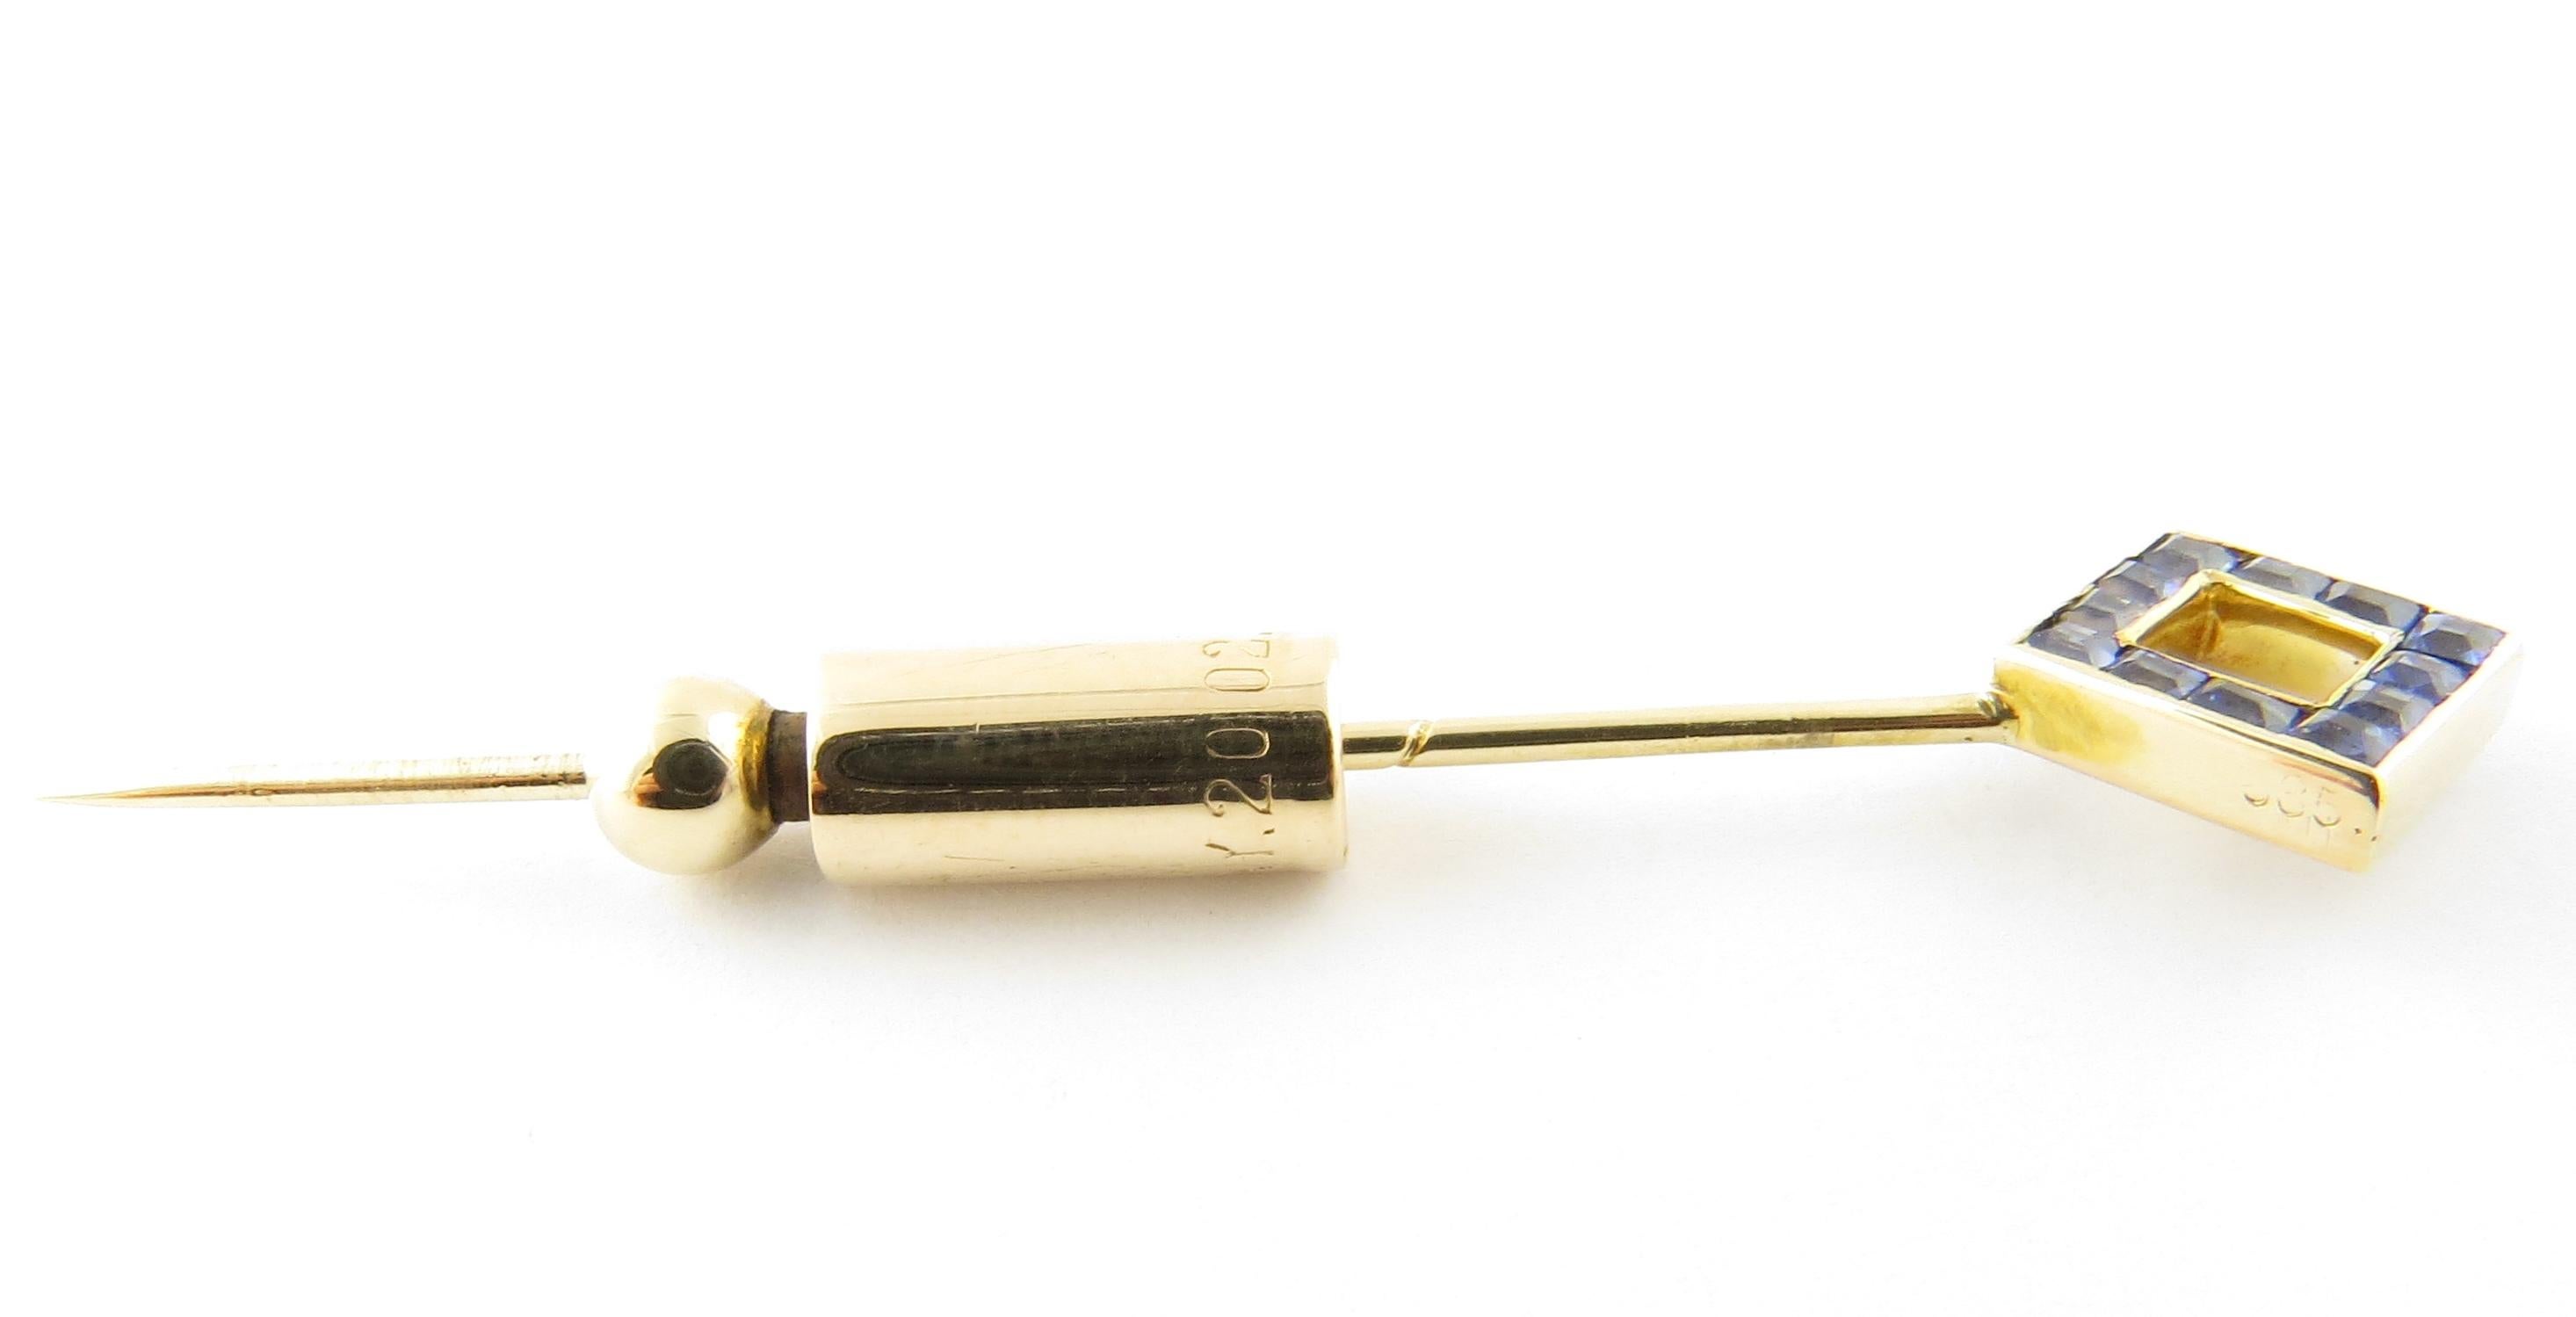 Vintage 14 Karat Yellow Gold and Sapphire Stick Pin

This elegant pin features 12 square genuine sapphires set in classic 14K yellow gold. Top of pin measures 12 mm x 12 mm.

Size: 58 mm

Weight: 2.2 dwt. / 3.5 gr.

Stamped: 585

Very good